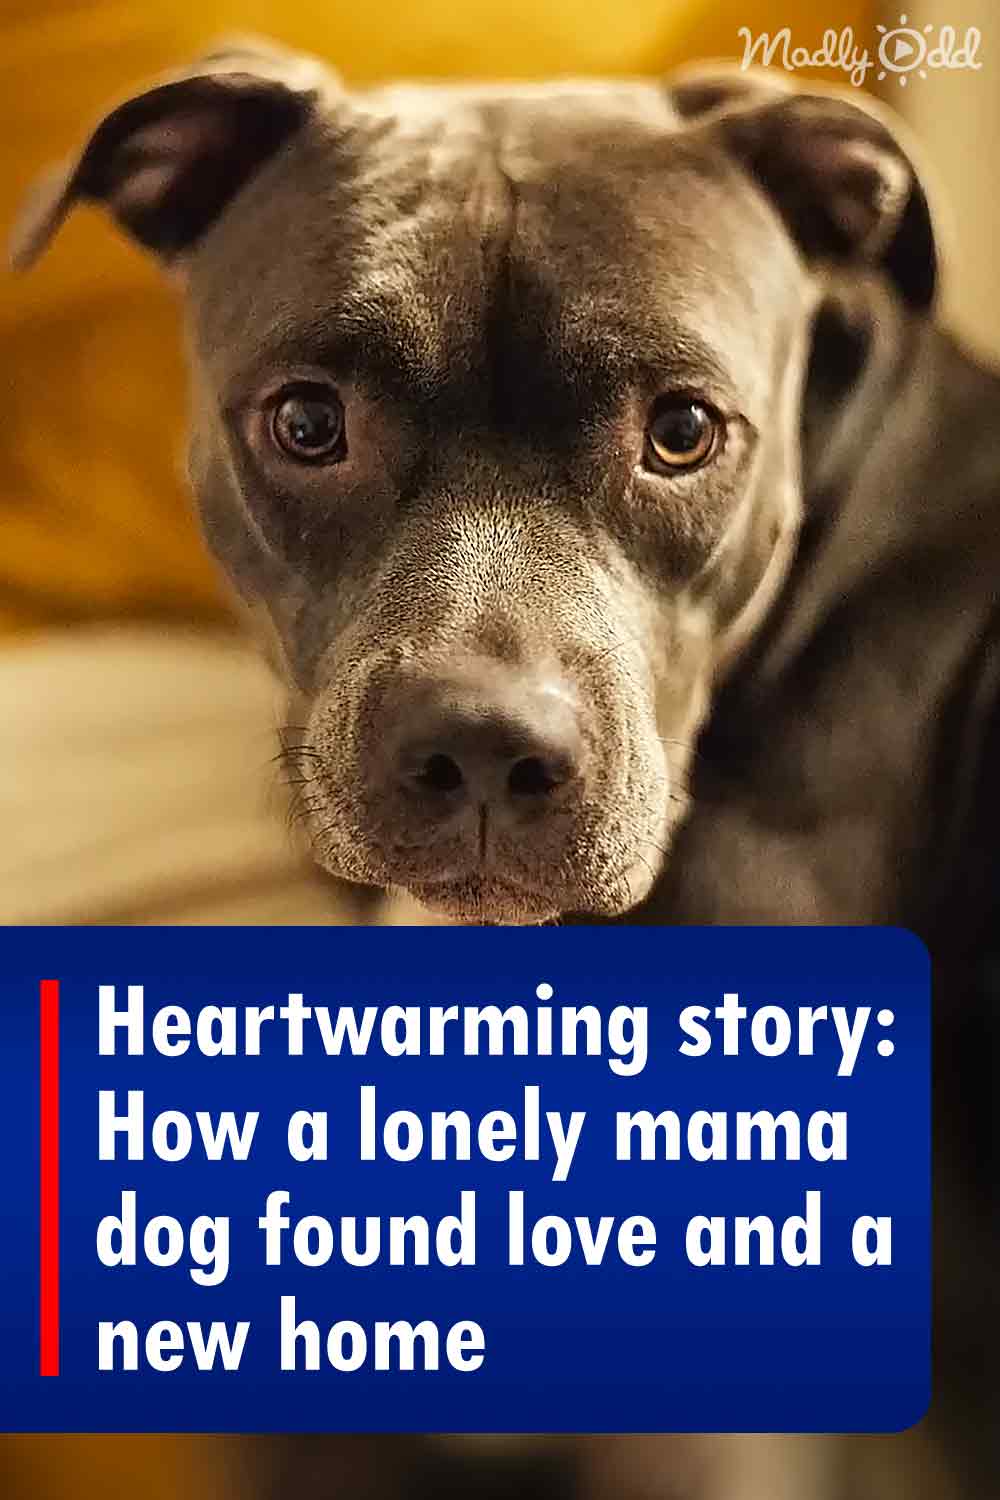 Heartwarming story: How a lonely mama dog found love and a new home